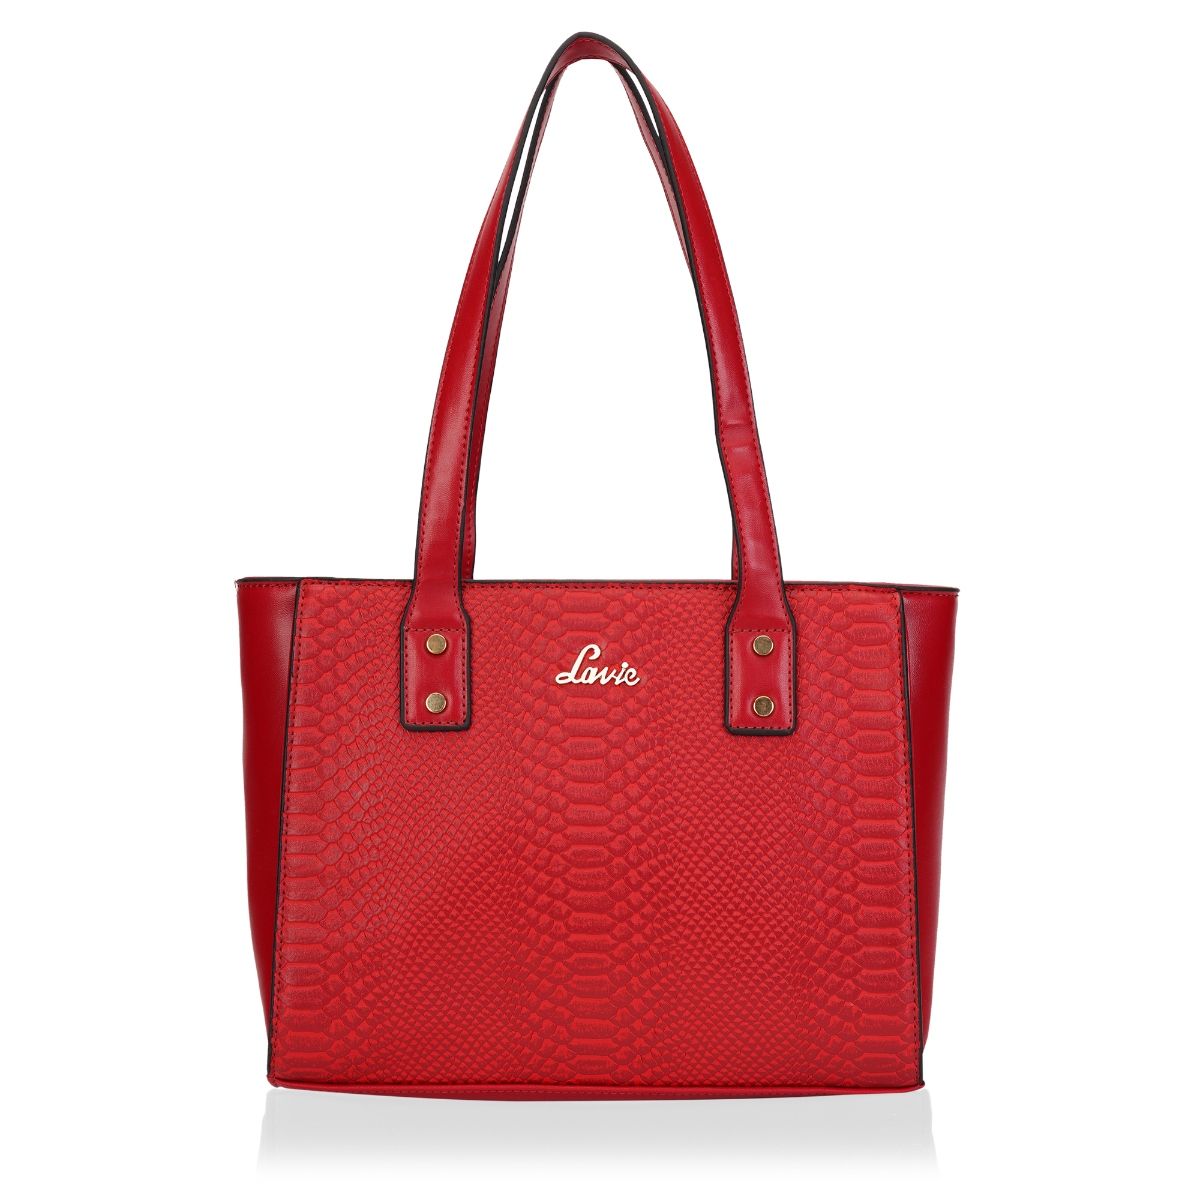 Buy Lavie Women's Kalani Tote Bag | Ladies Purse Handbag Online at Lowest  Price Ever in India | Check Reviews & Ratings - Shop The World